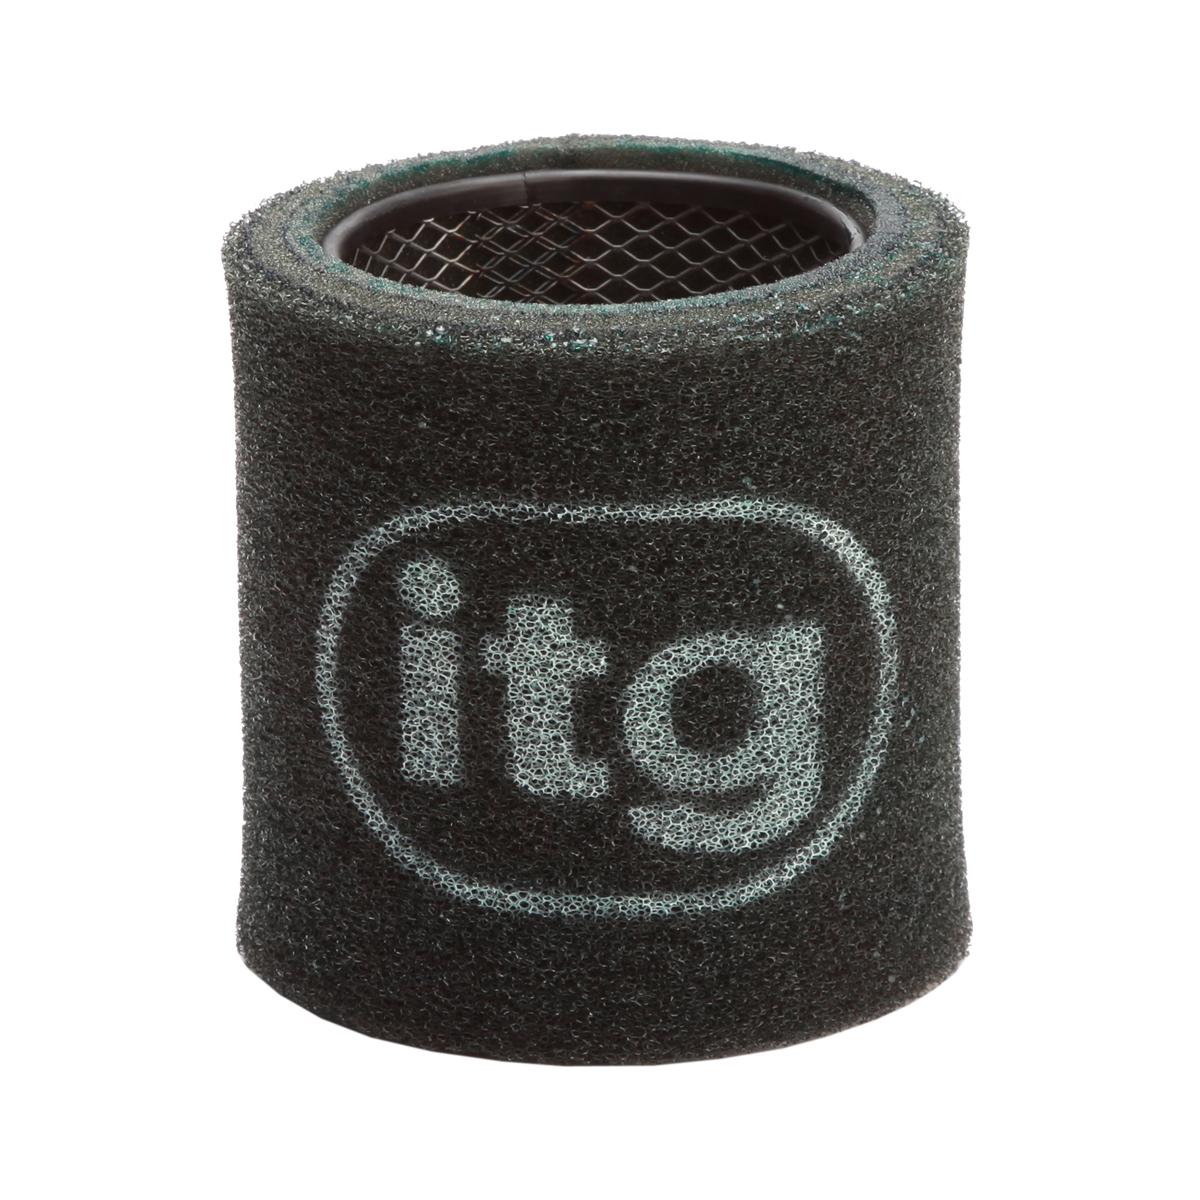 ITG Air Filter For Volvo 440 1.7 Fuel Inj Cars